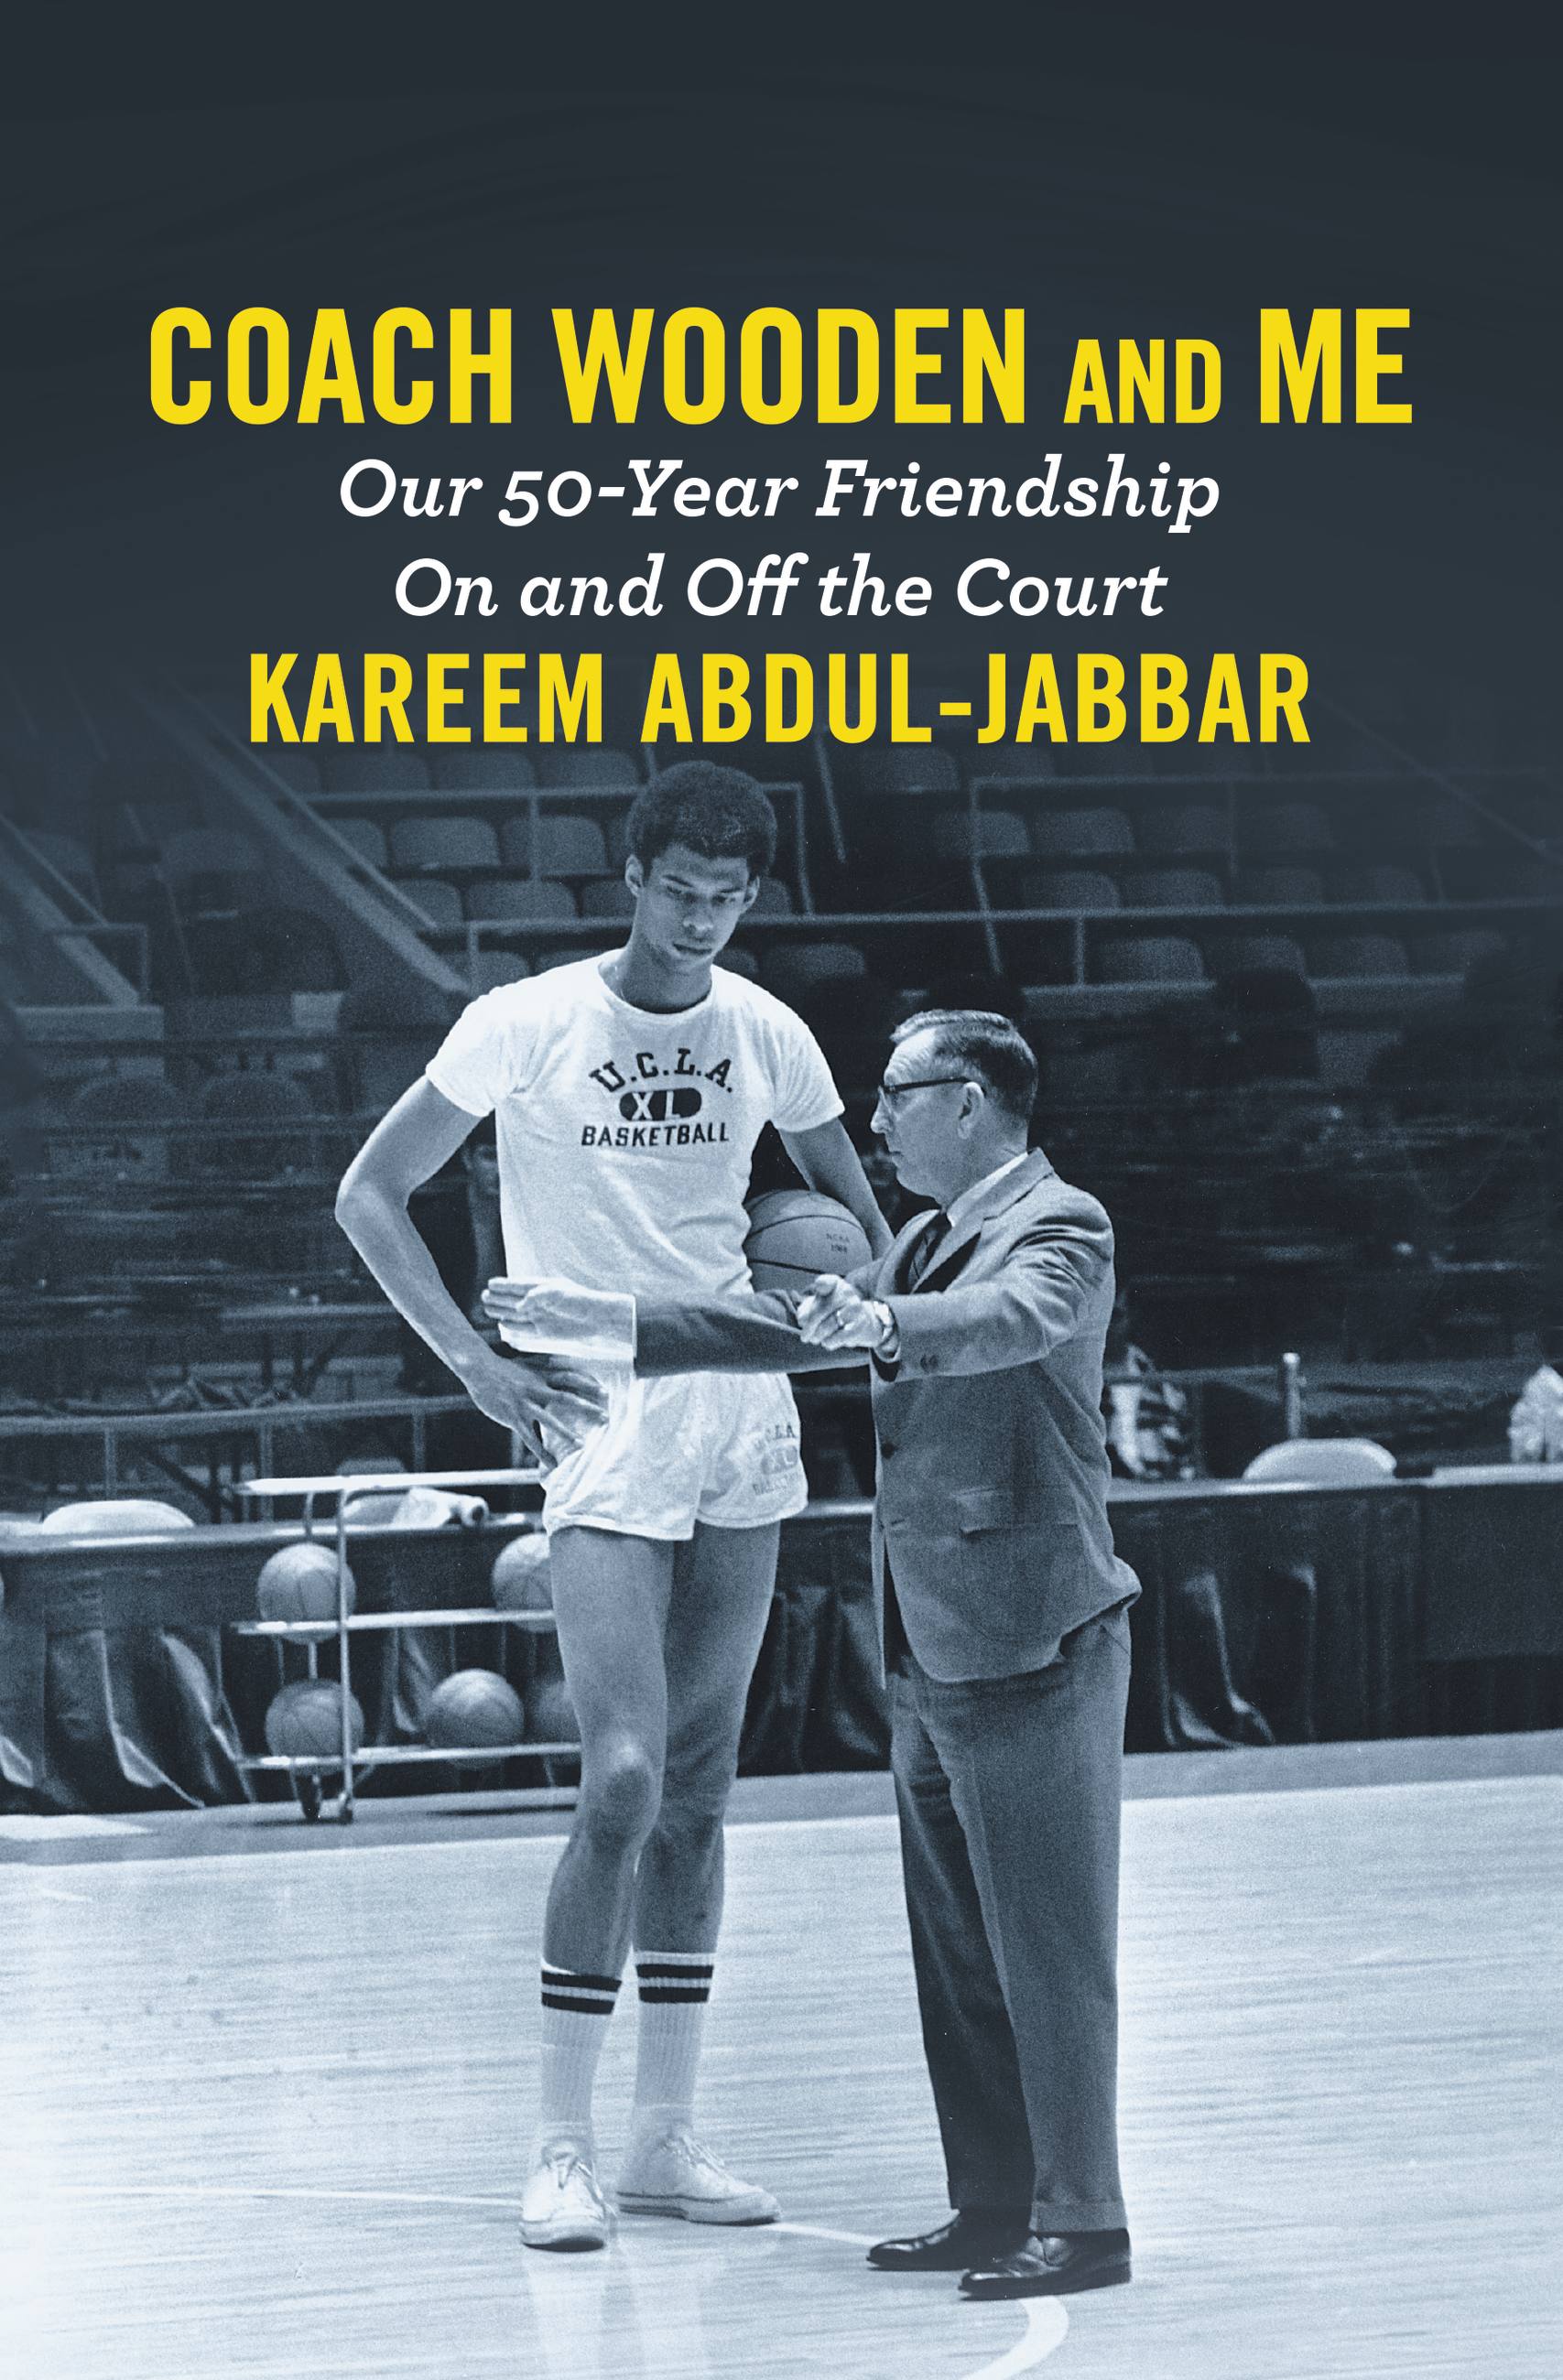 Coach Wooden and Me by Kareem Abdul-Jabbar | Grand Central Publishing